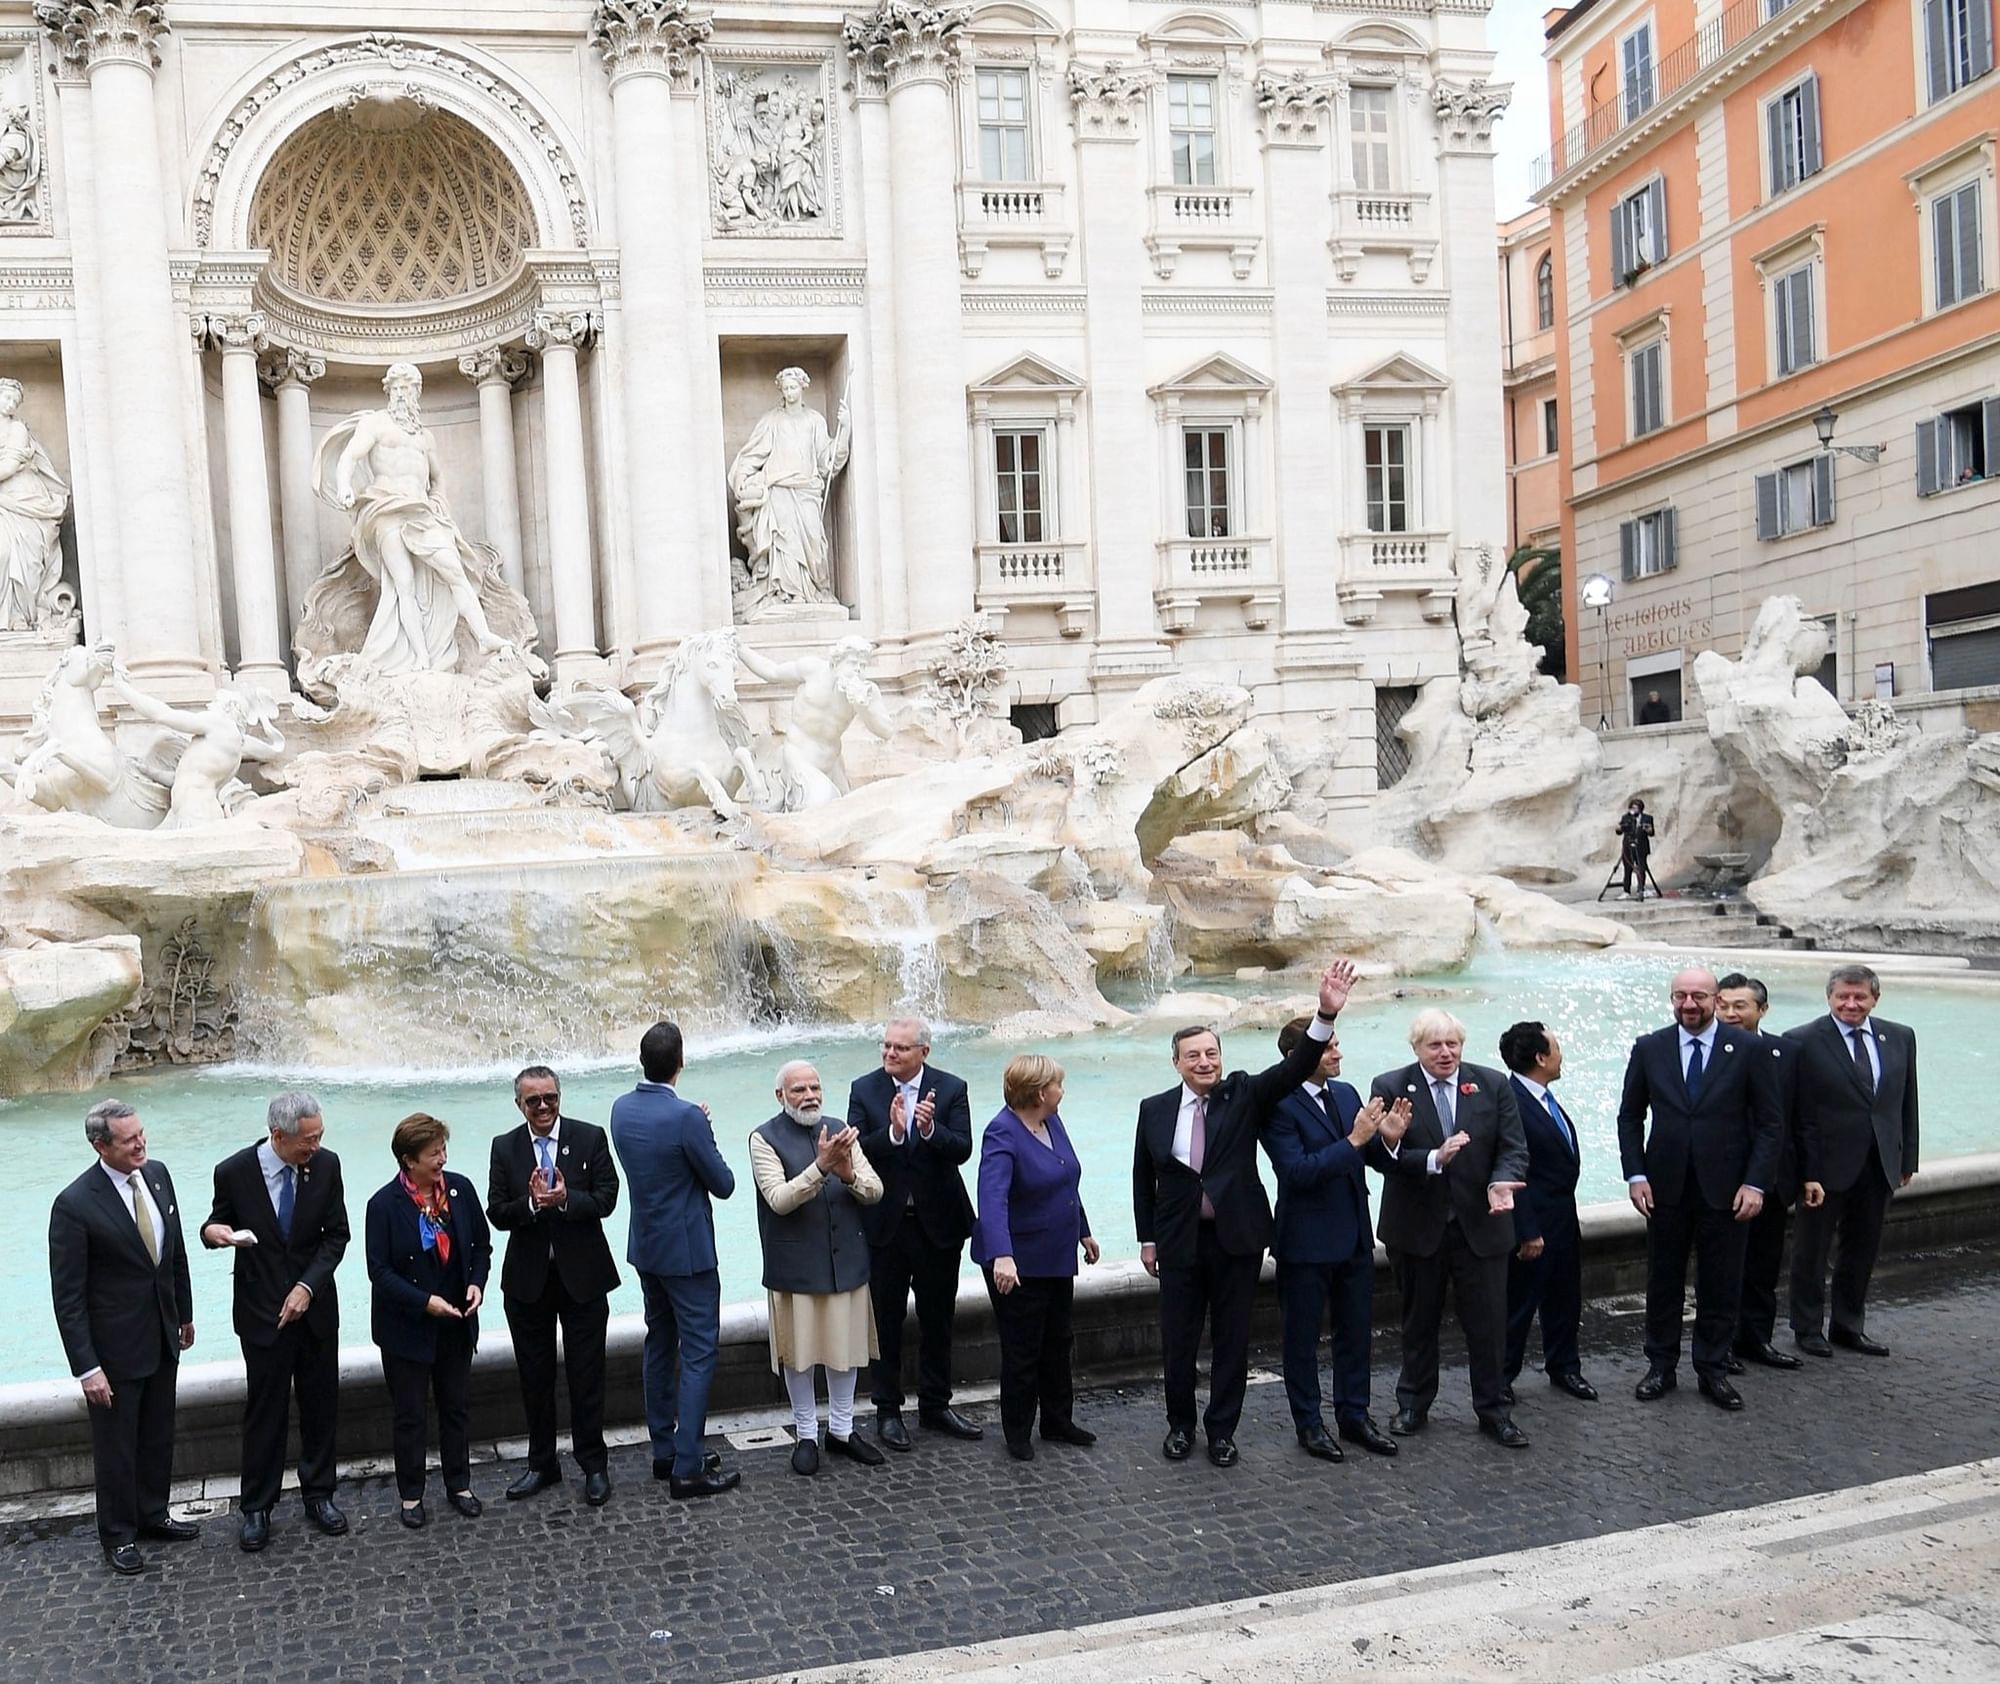 <div class="paragraphs"><p>G20 leaders at Rome's Trevi Fountain.</p></div>